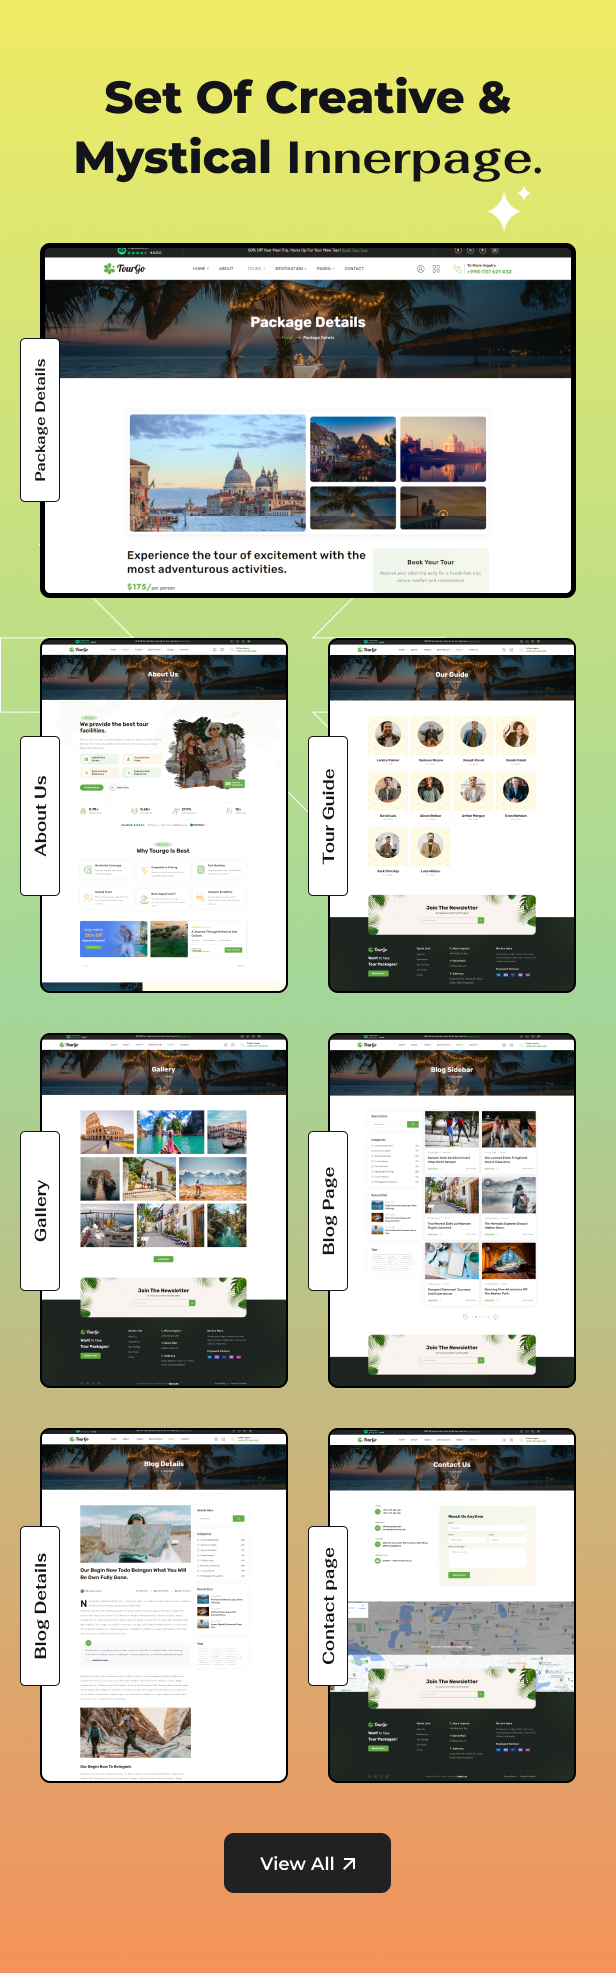 TripRex - Travel Agency and Tour Booking Template - 5